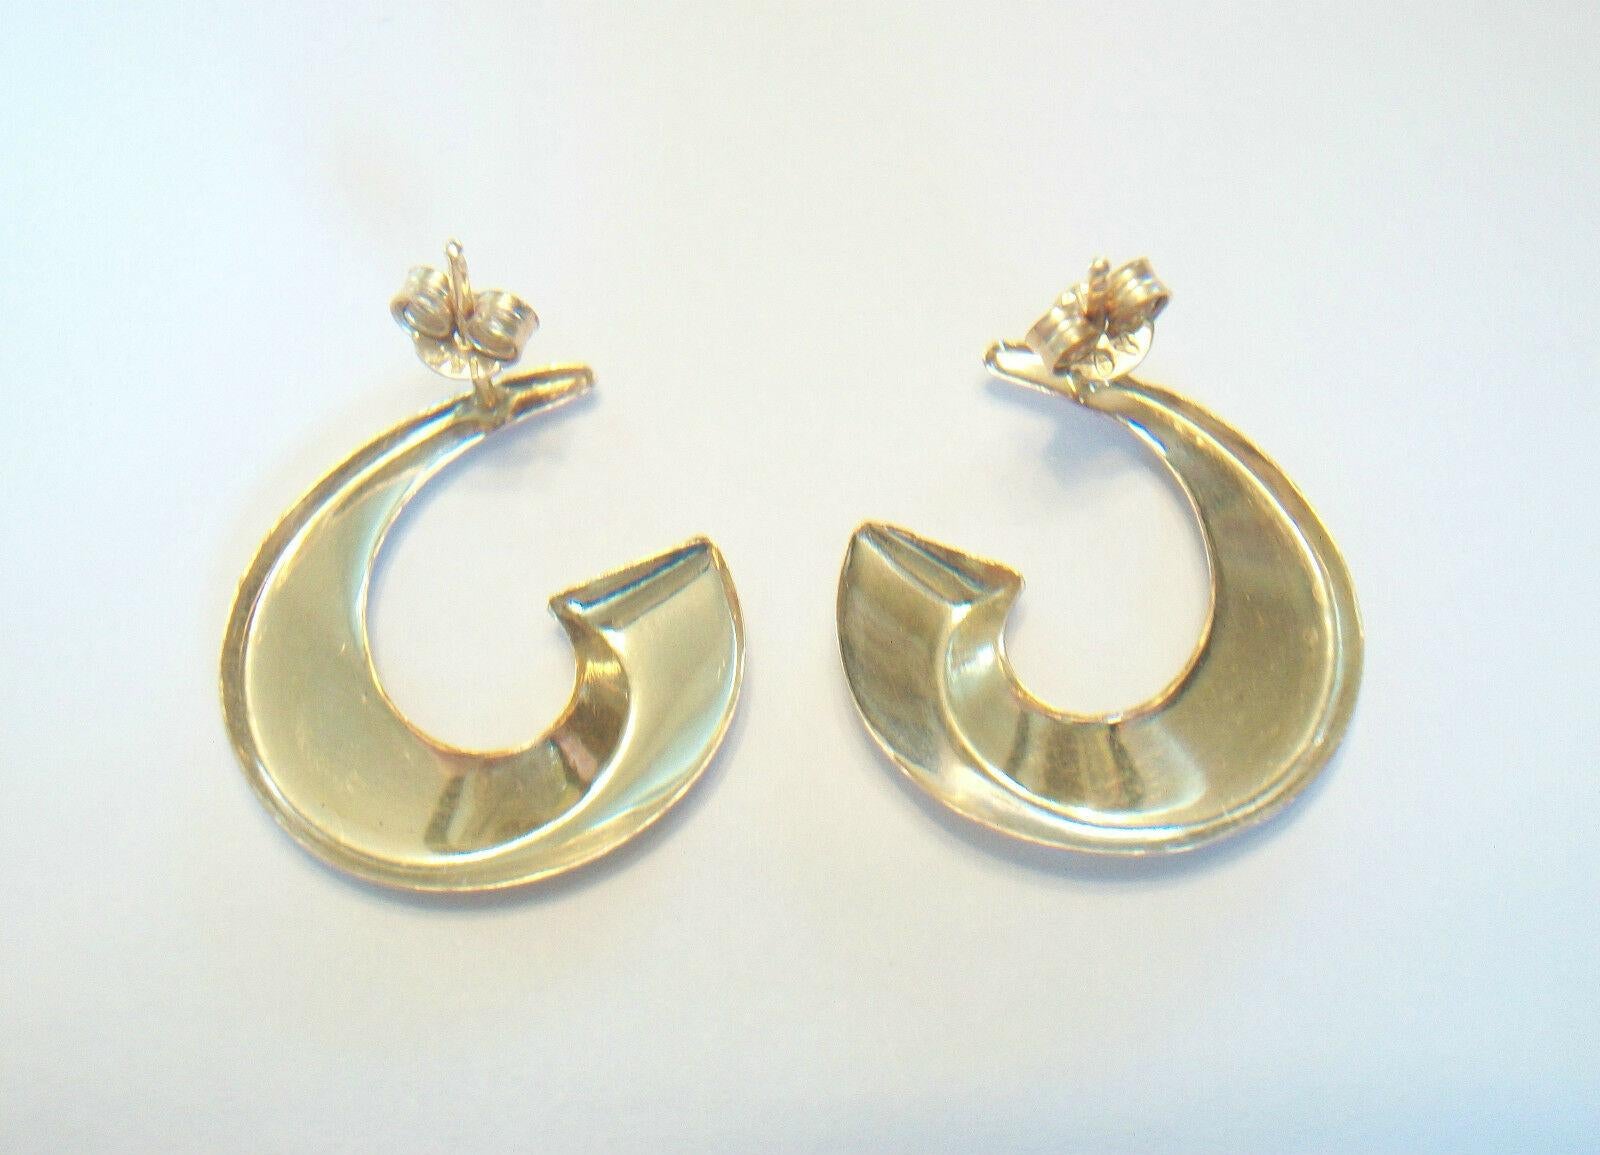 Vintage 14k Yellow Gold 'C' Scroll Earrings, Signed, U.S, Late 20th Century For Sale 2